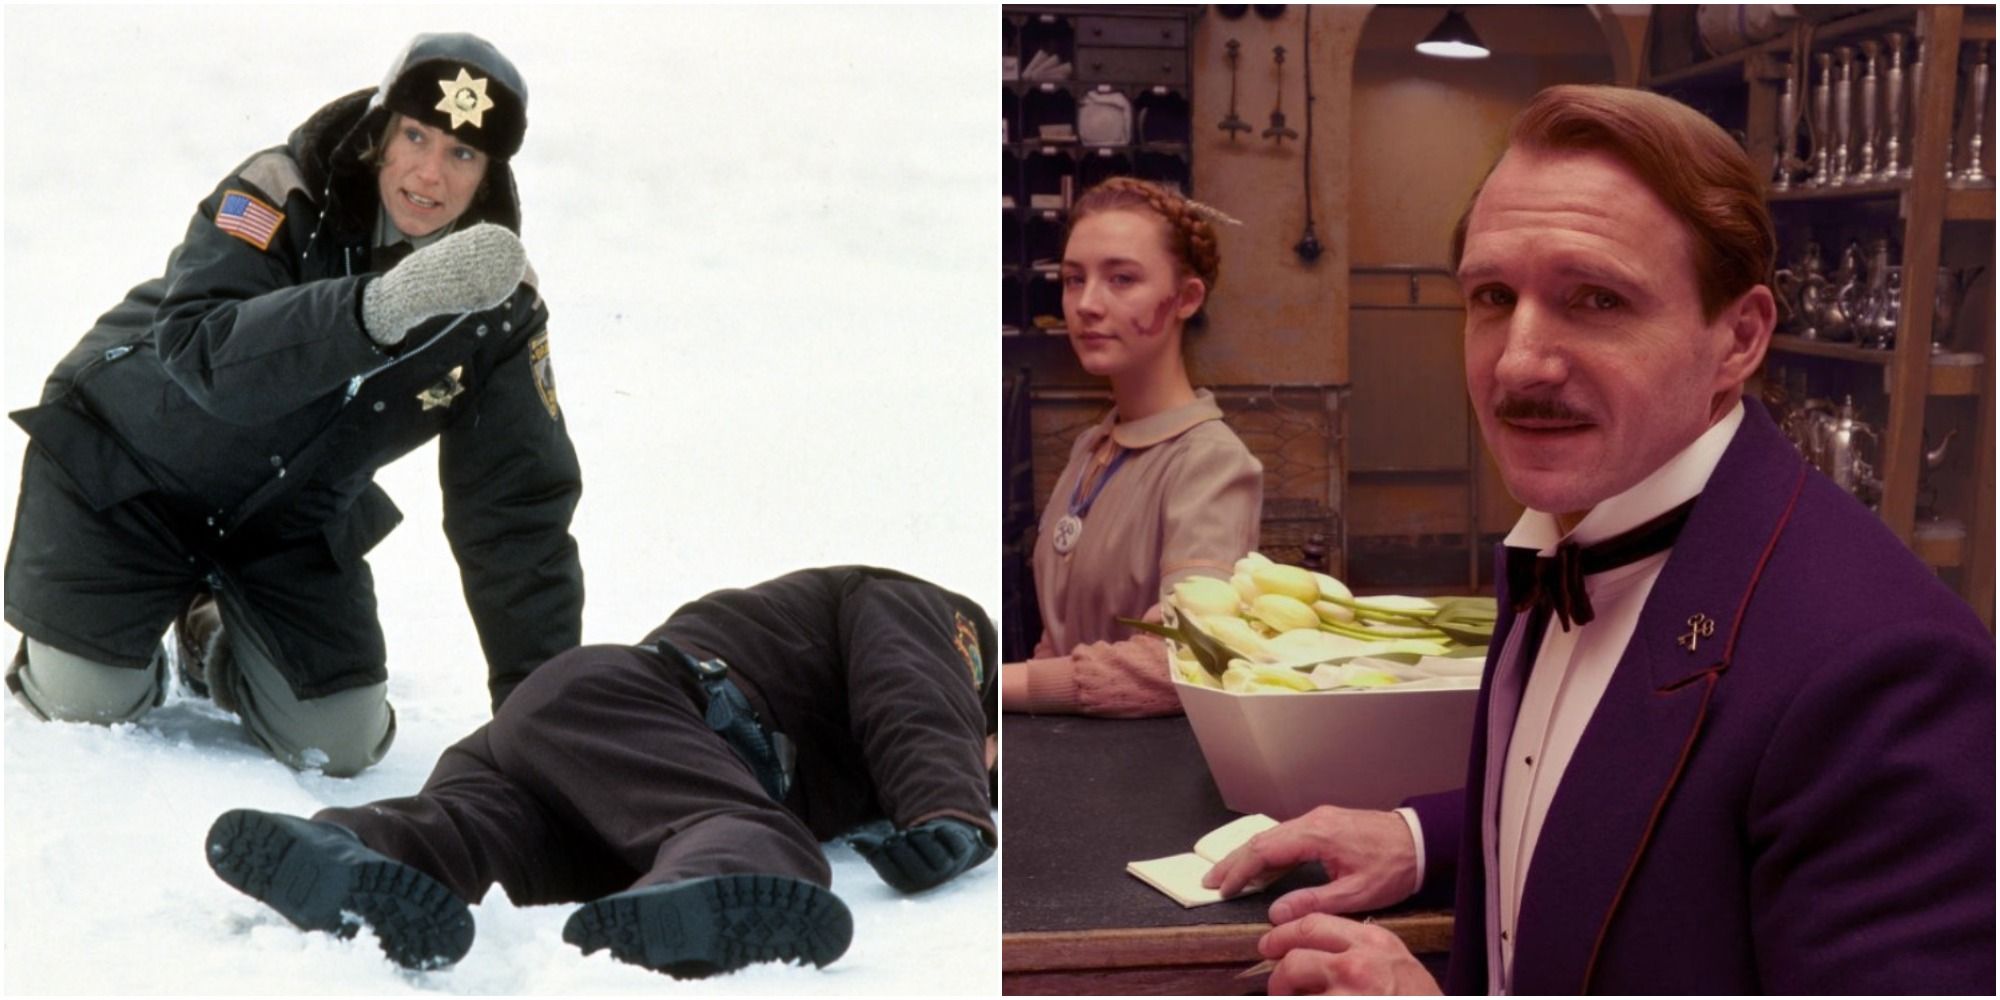 Split Image showing Stills from Fargo and The Grand Budapest Hotel